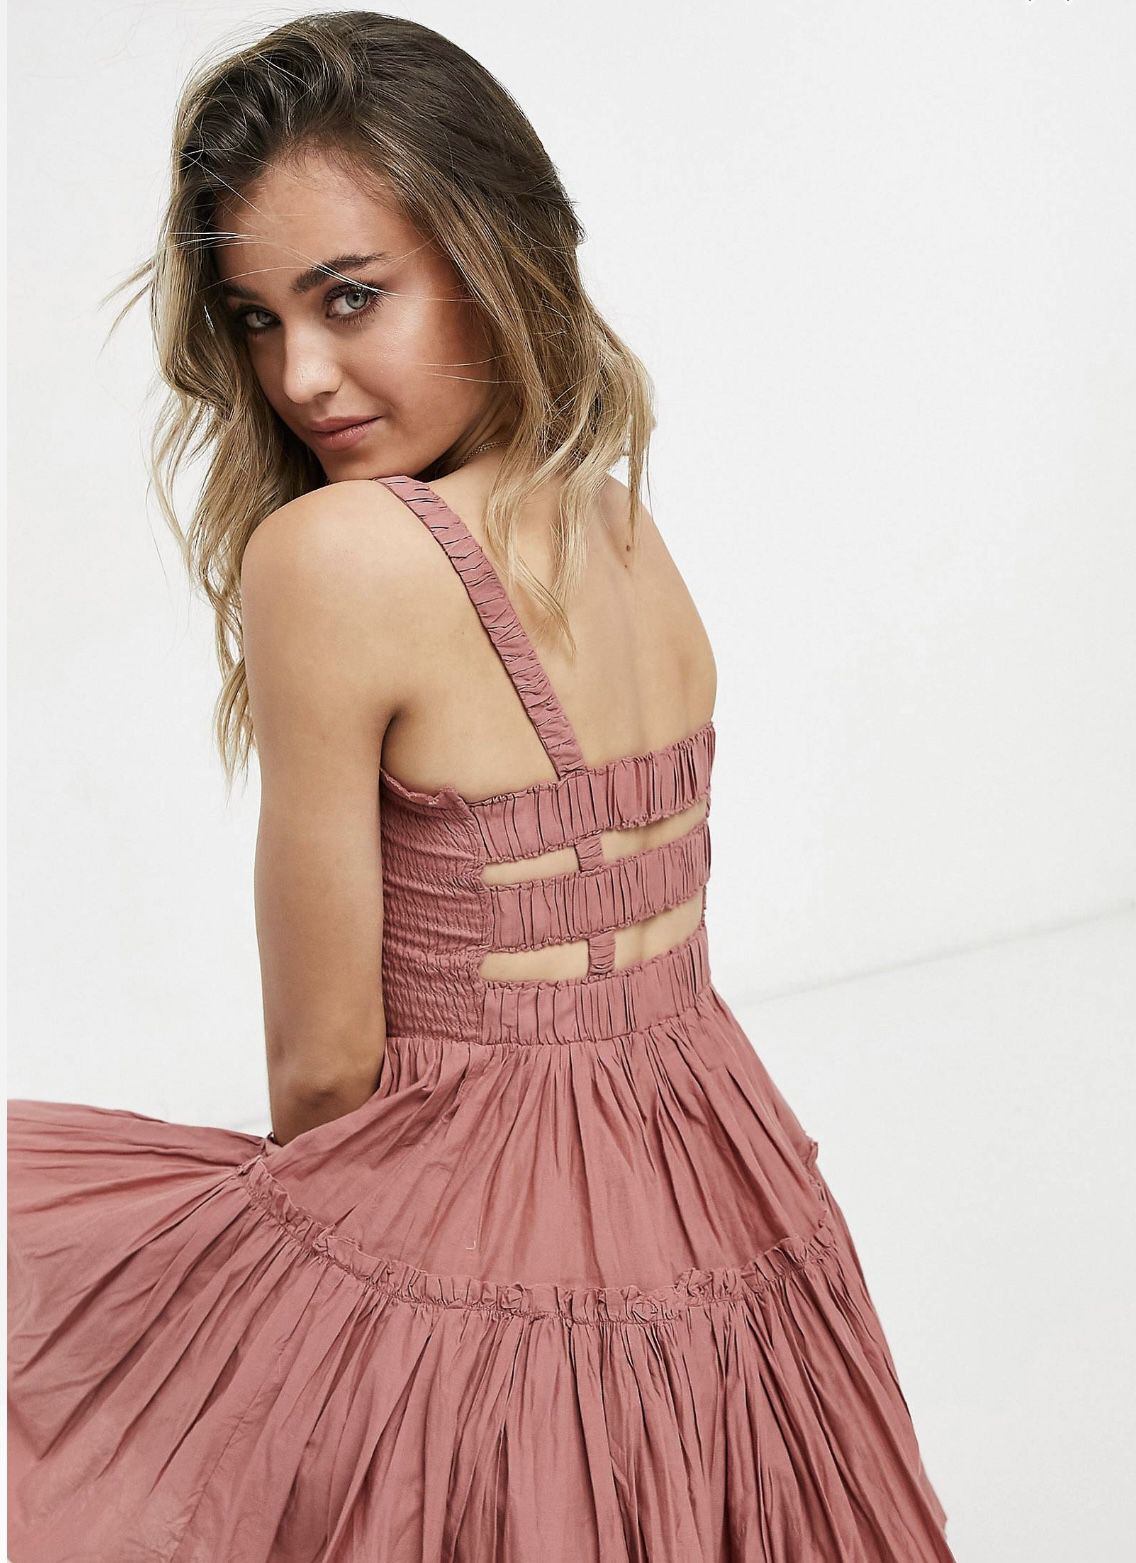 Mini sundress with raw edges in dusty pink. 